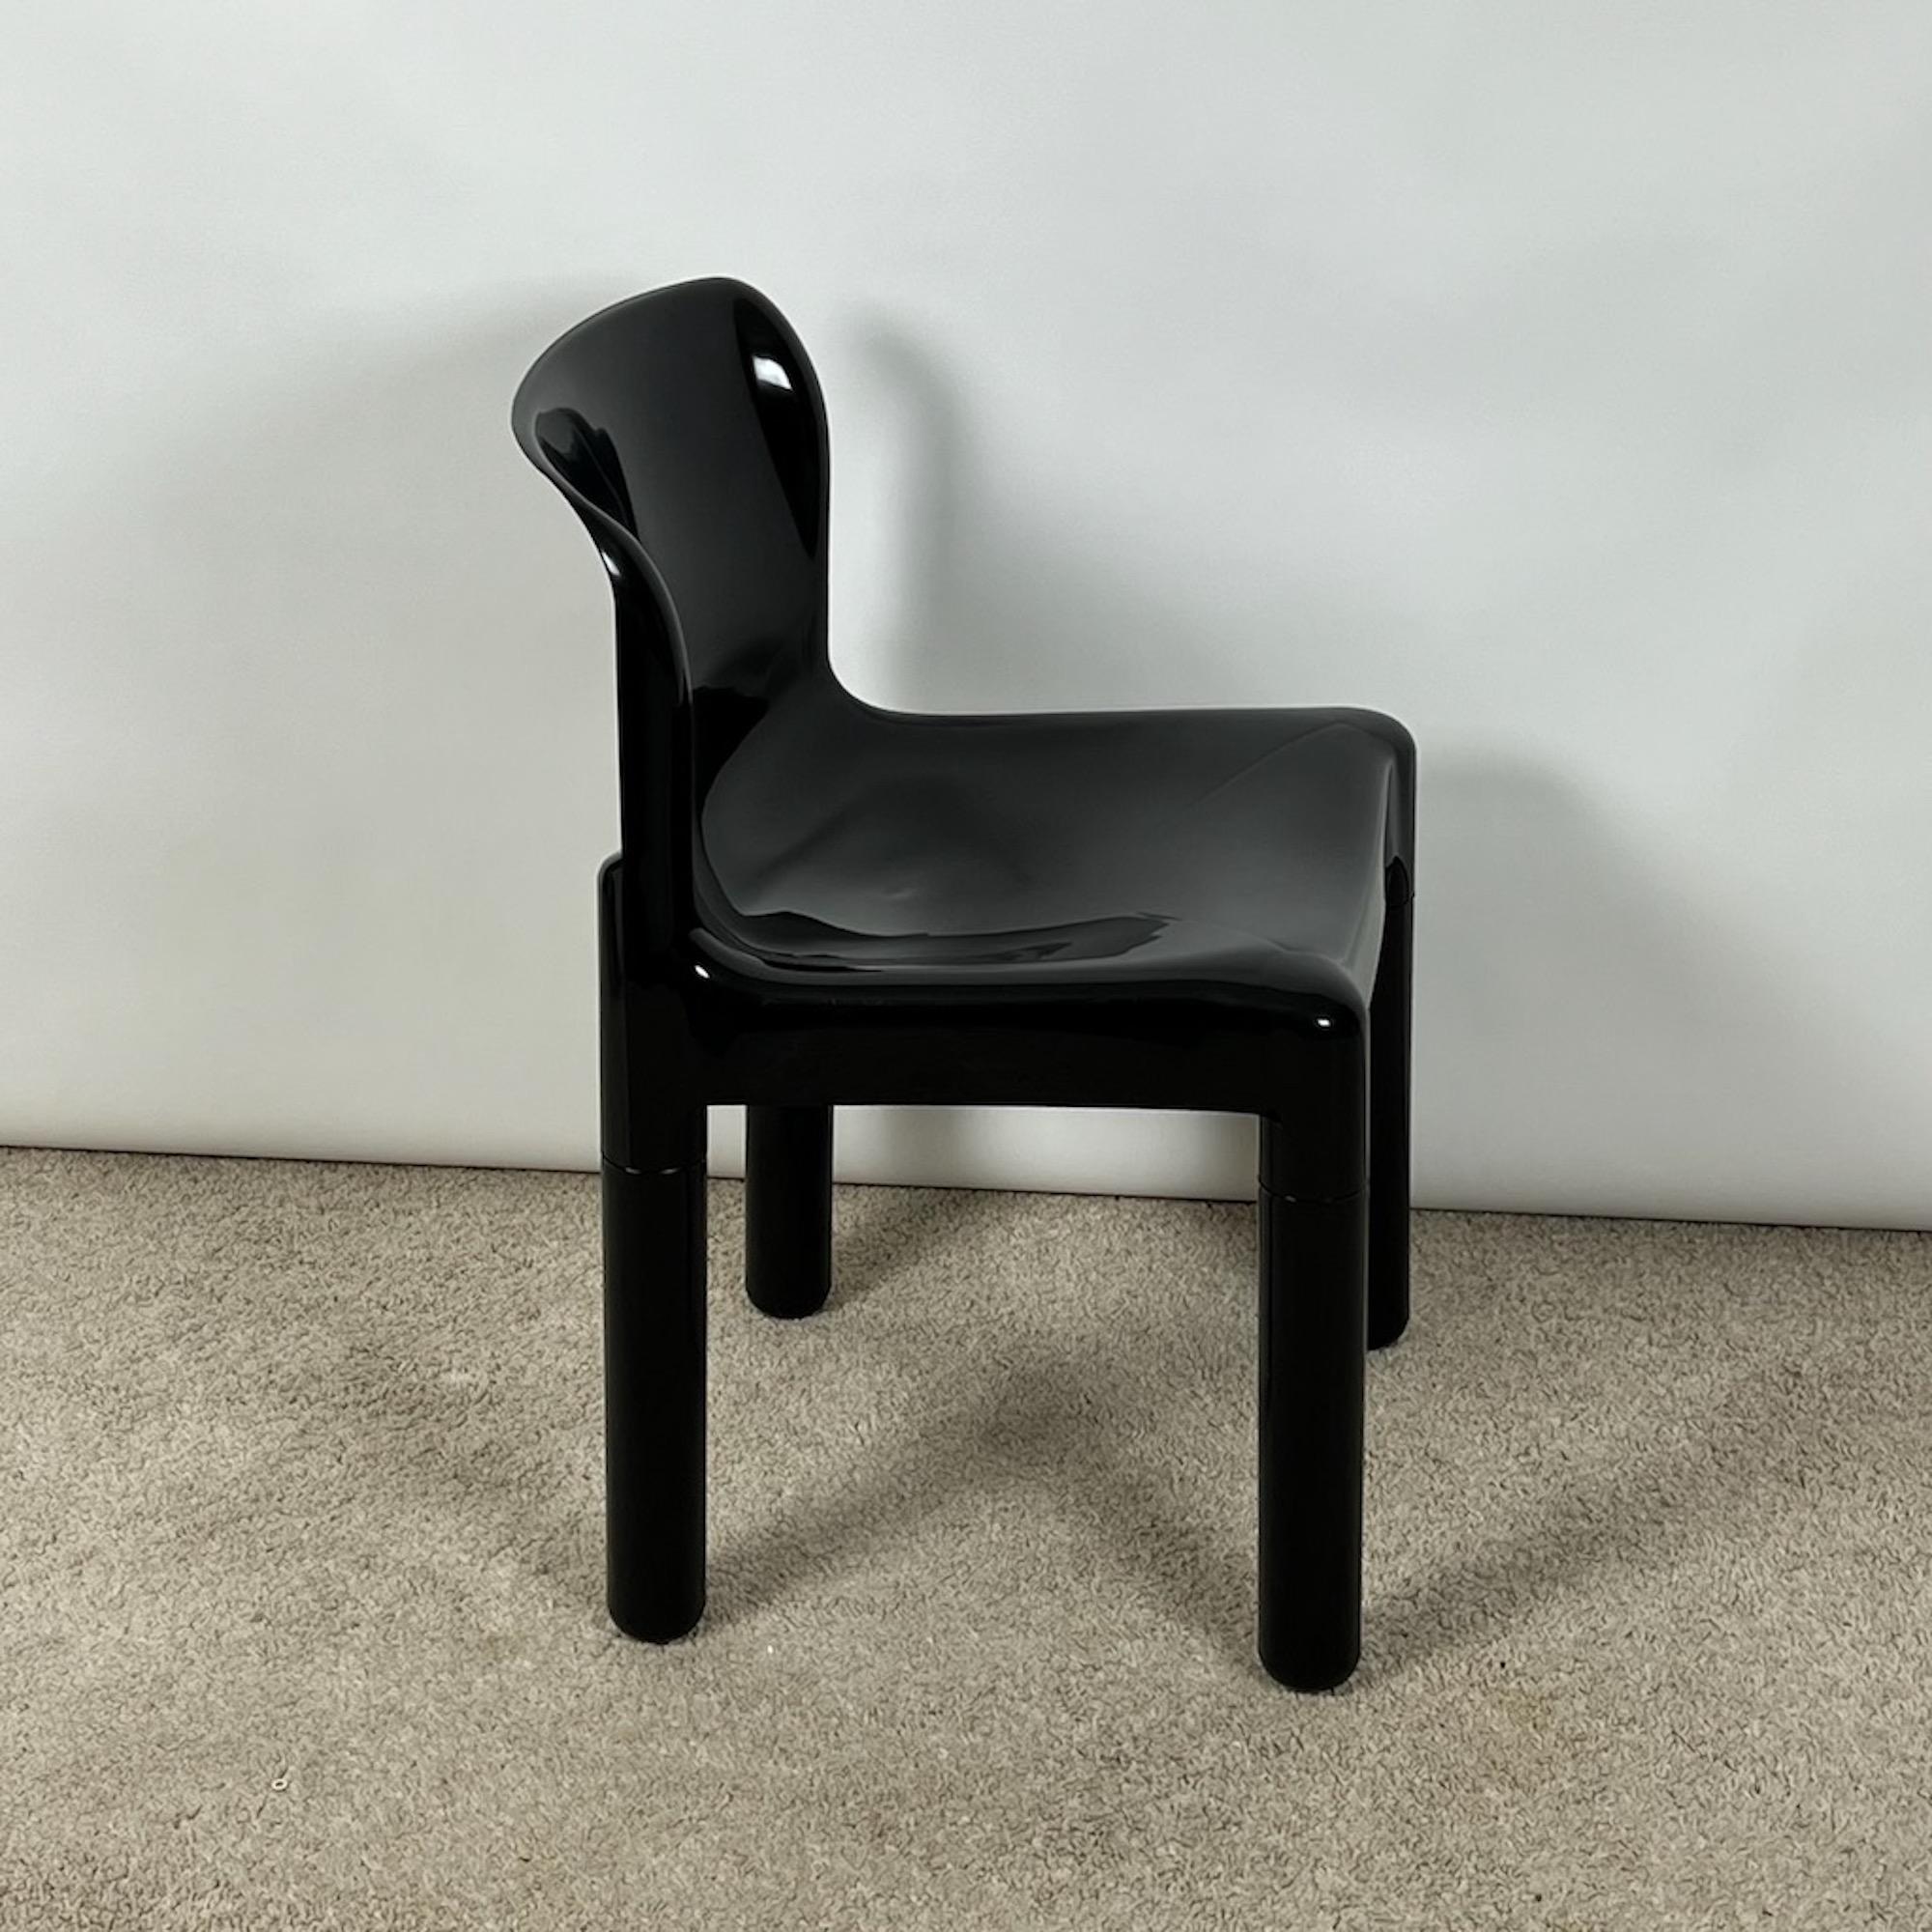 Industrial Kartell Model 4875 Chair by Carlo Bartoli - 1985 Edition New Old Stock in Black